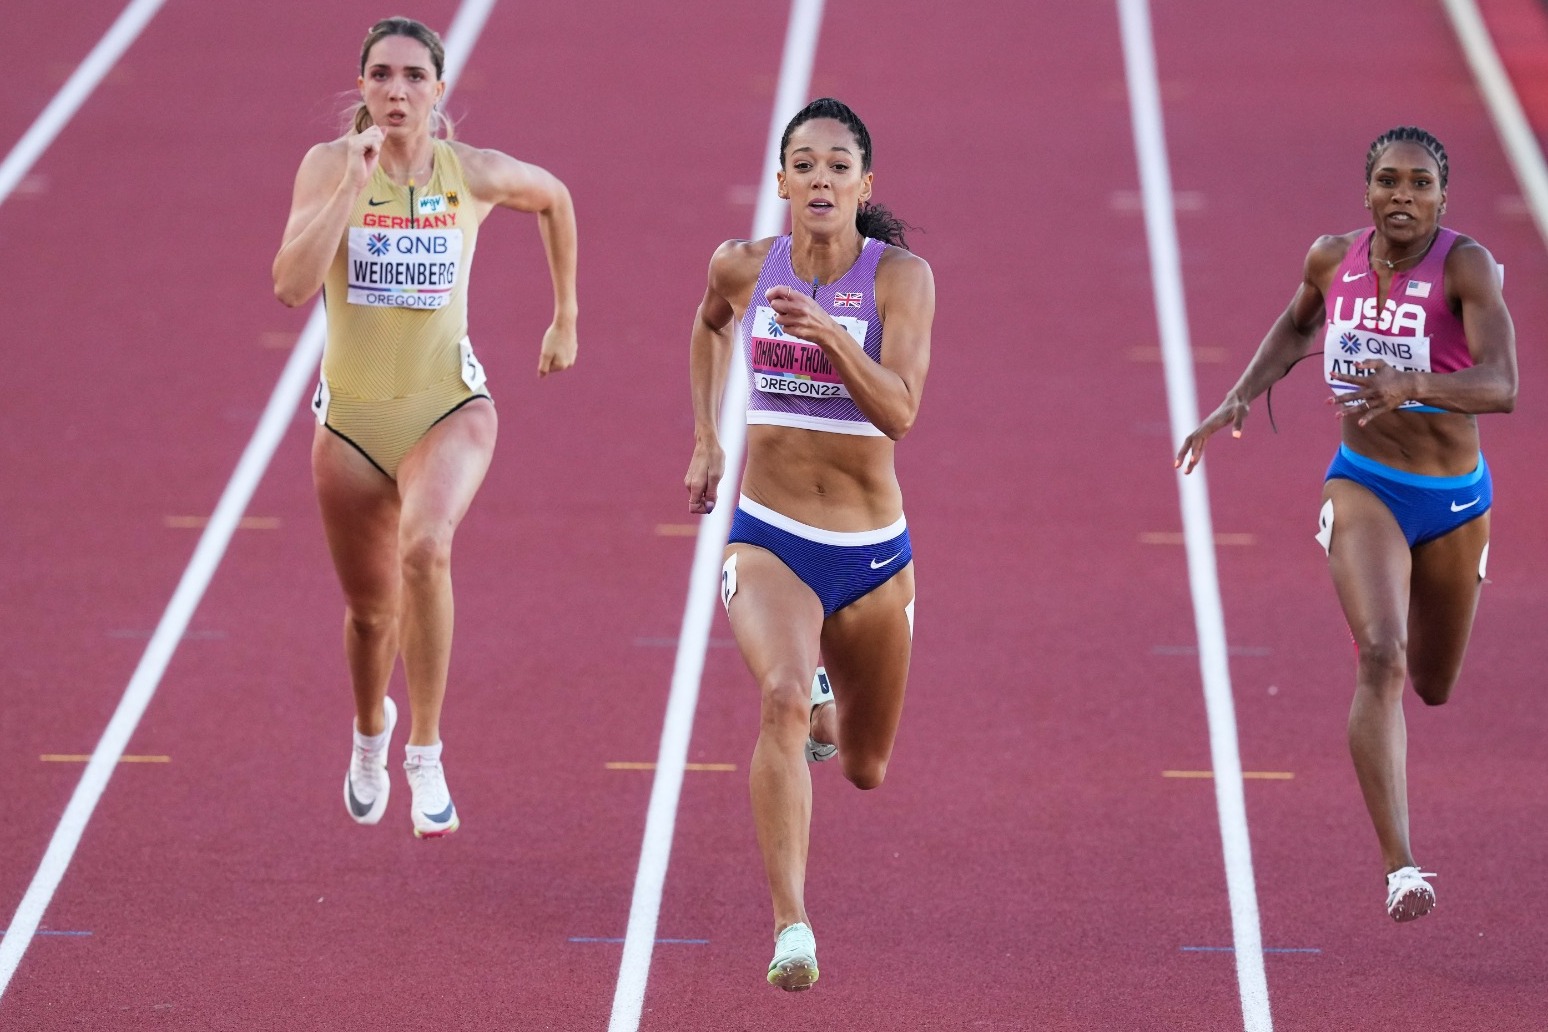 Katarina Johnson Thompson frustrated at failure to challenge for medals